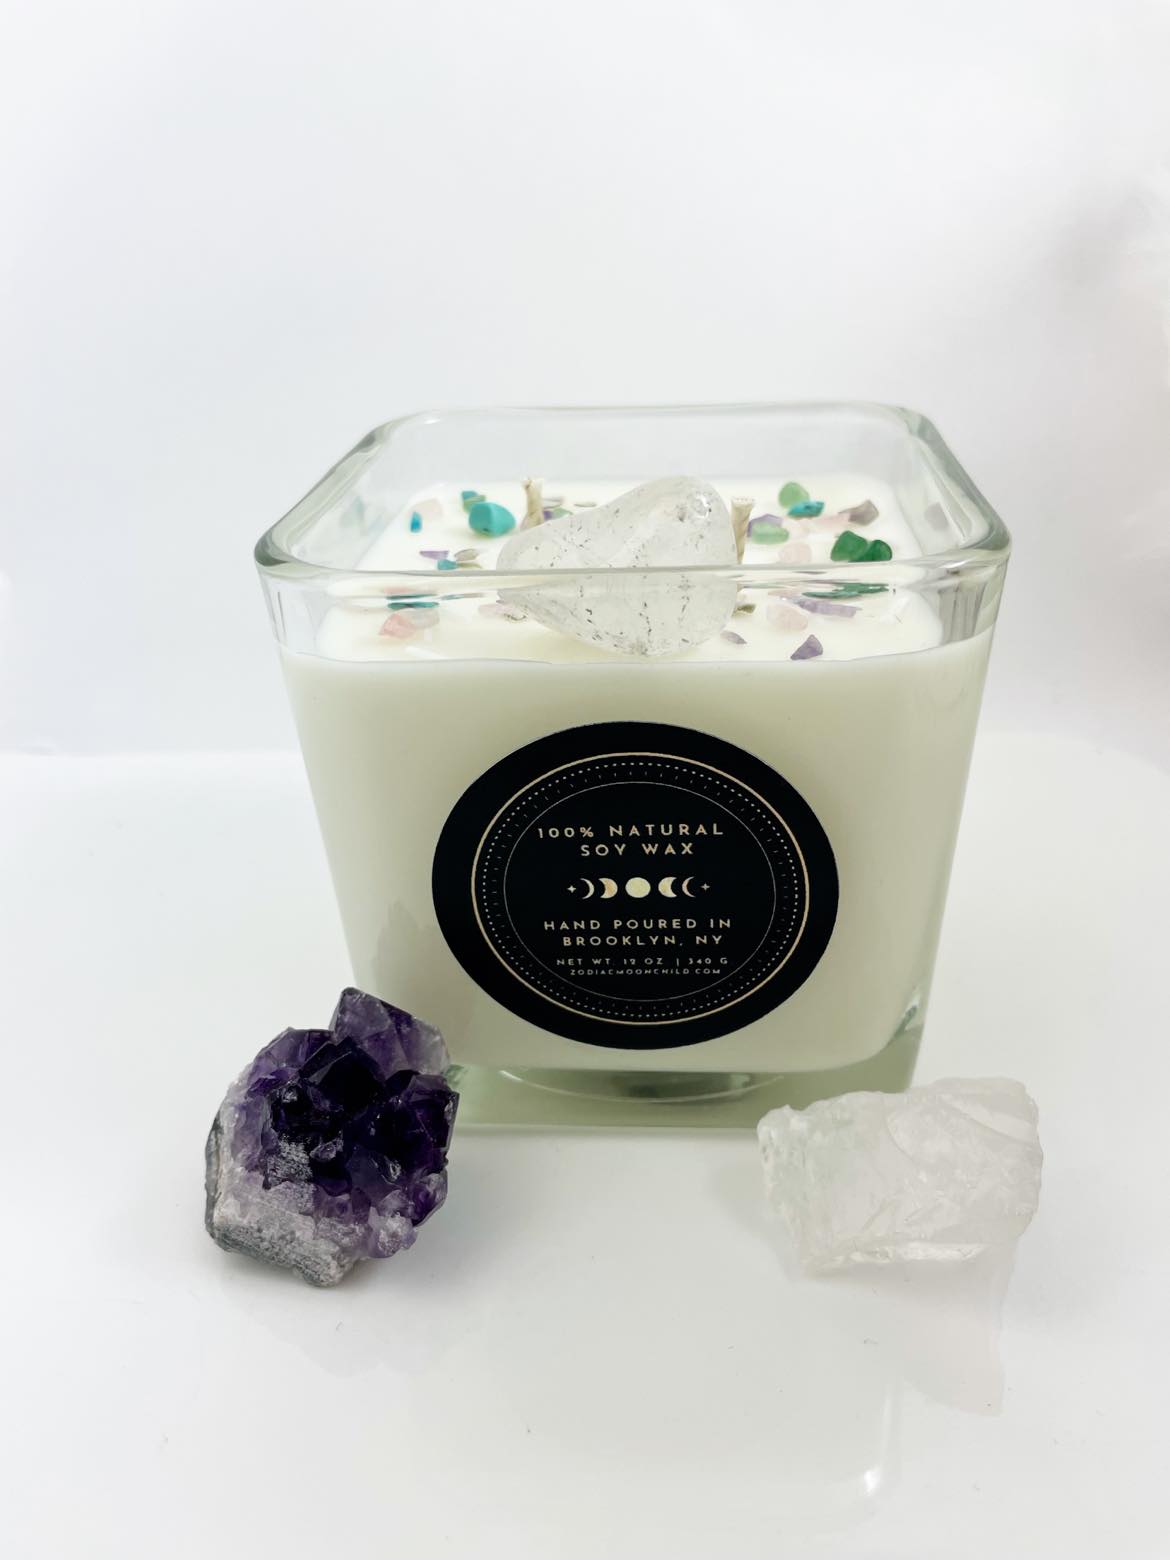 Cozy Nights - Nordic Lights - Fall - Crystal Candle - Spiritual Crystal Candle Collection - Crystal & Herb Candle – 100% Natural Soy Wax